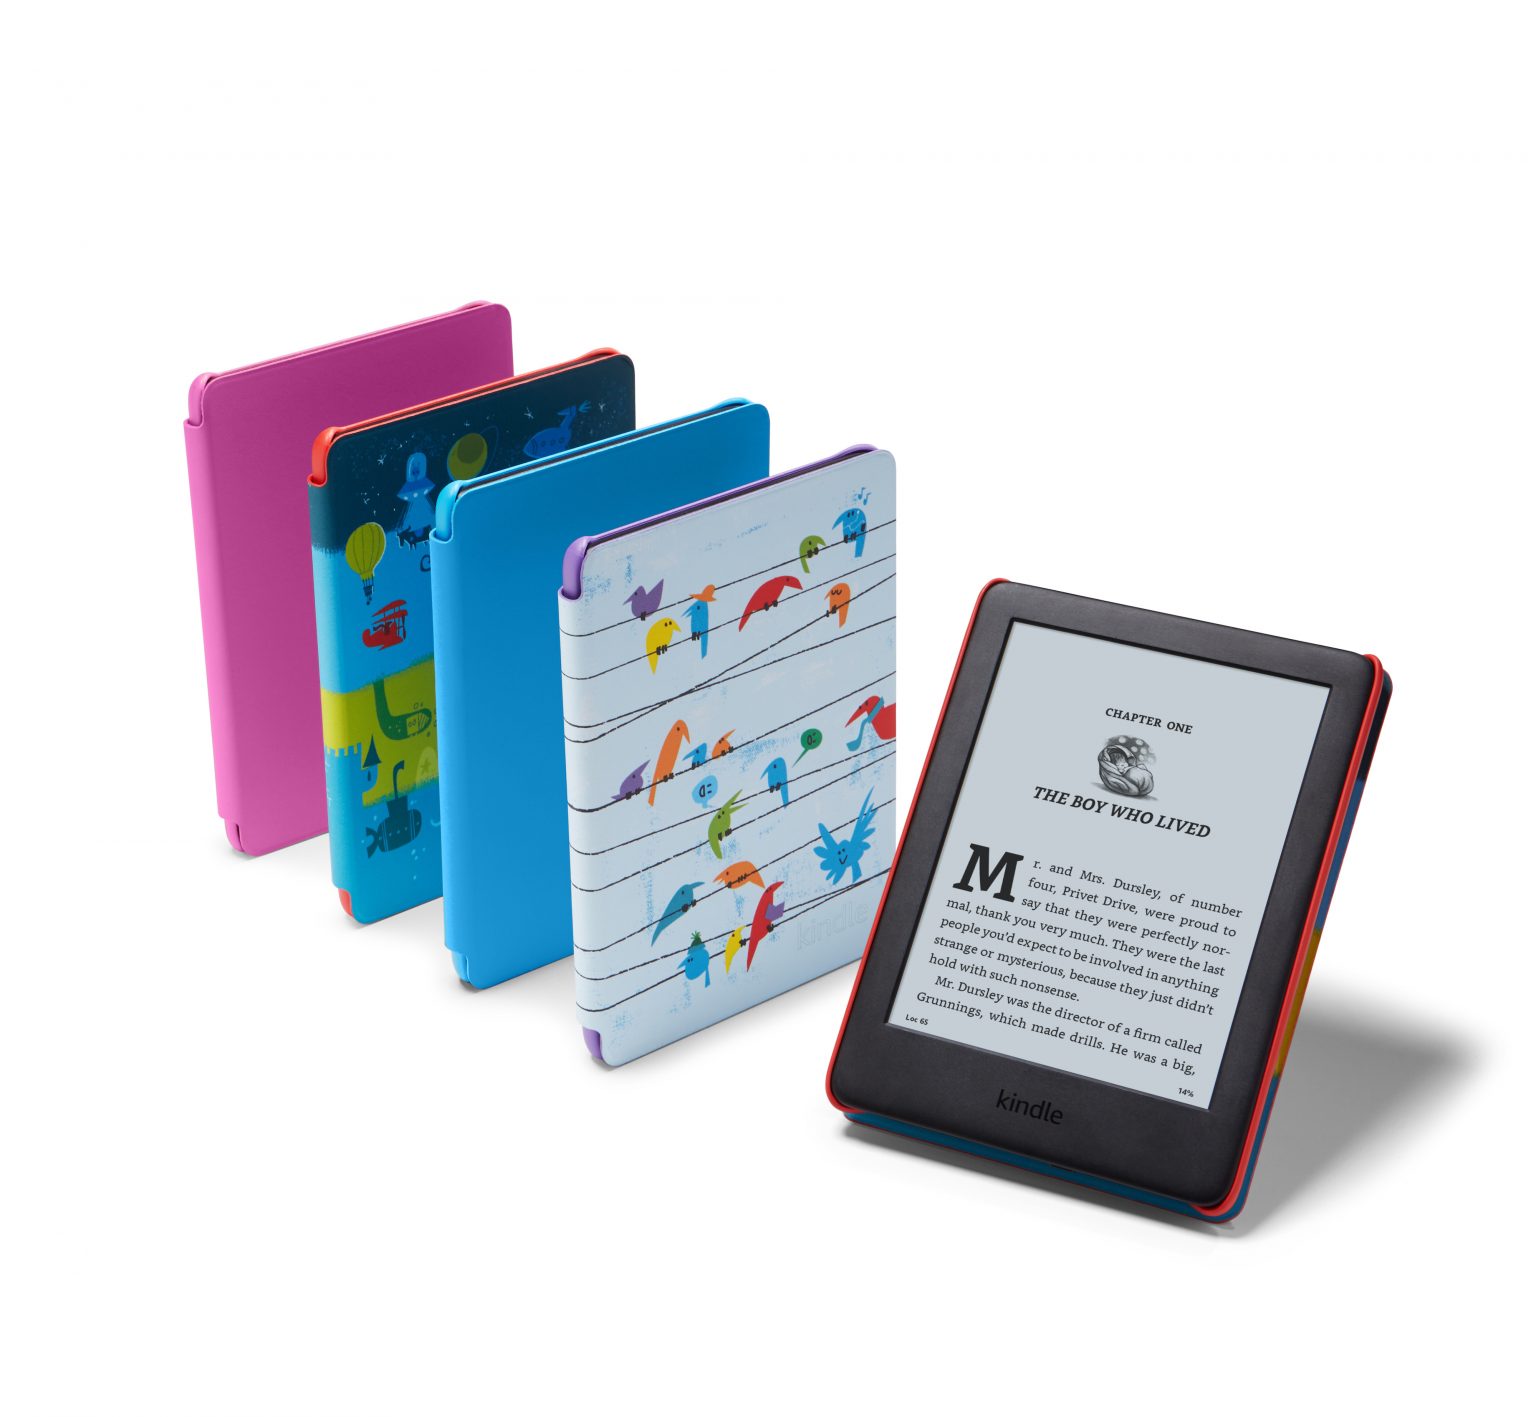 amazon-s-new-kindle-for-kids-is-probably-not-as-good-for-kids-as-real